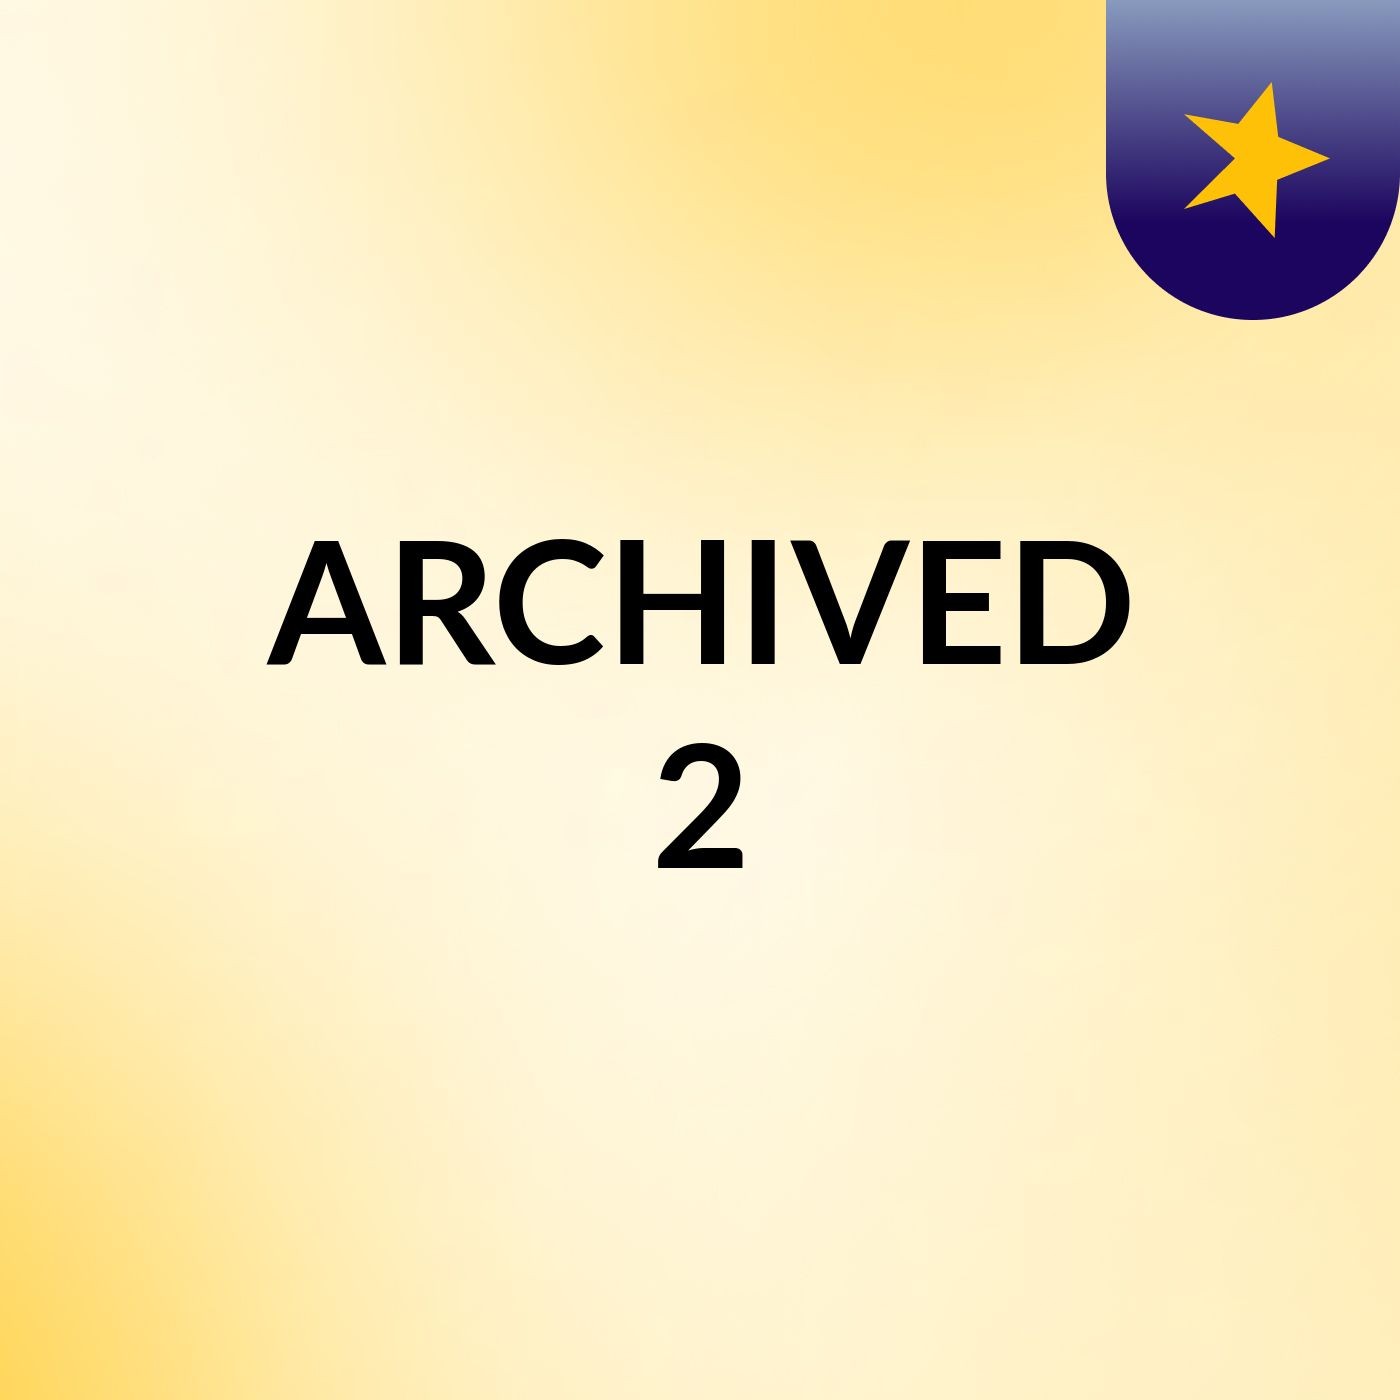 ARCHIVED 2